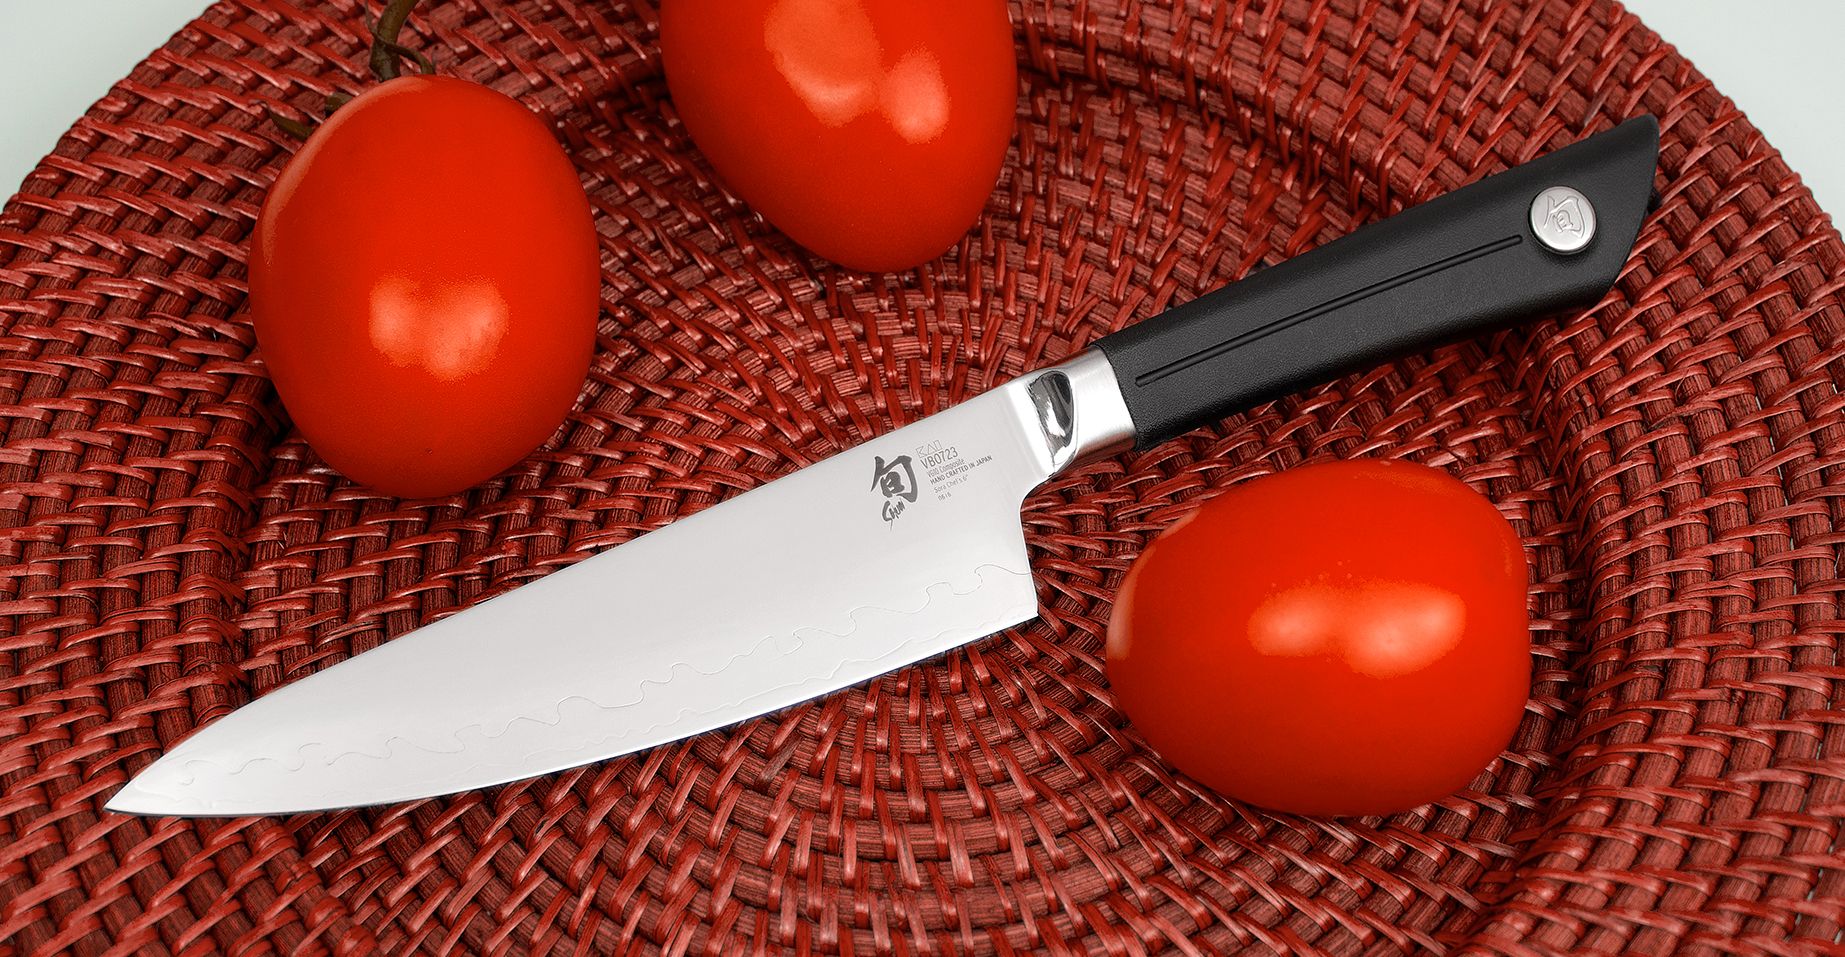 Pro Series 2.0 6inch Chef Knife with Kullens